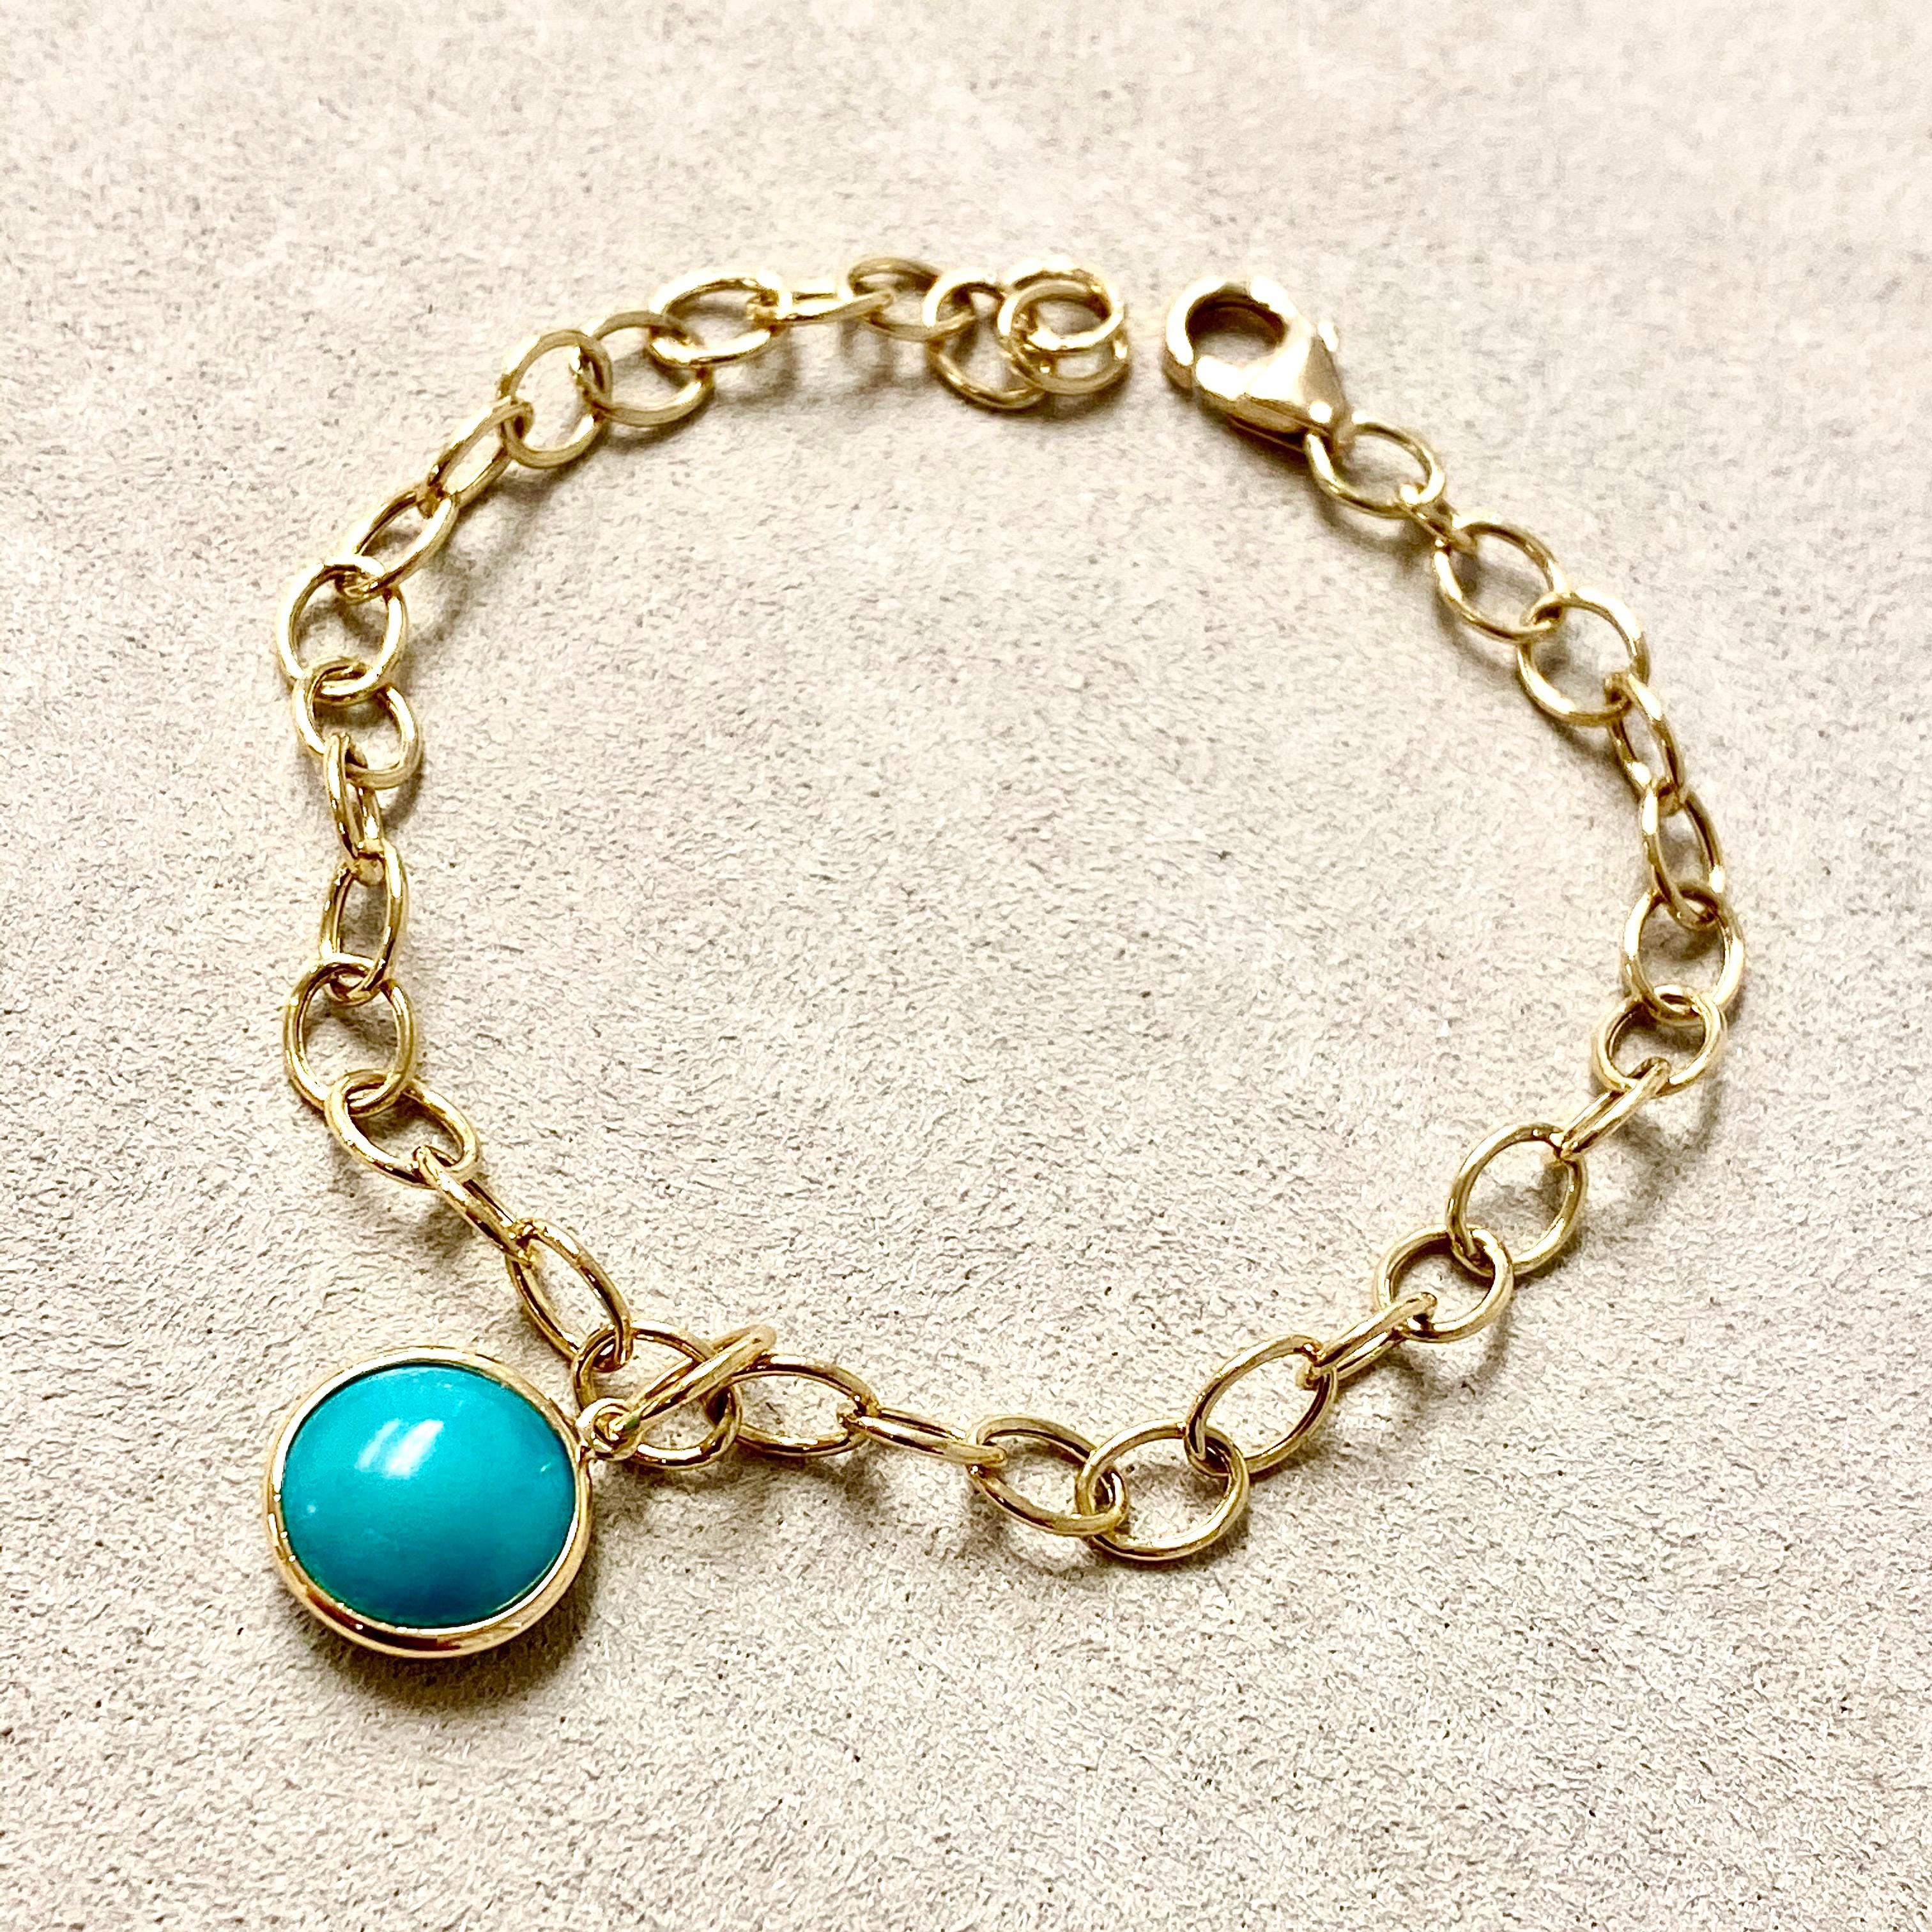 Created in 18 karat yellow gold
Sleeping Beauty Turquoise 3.5 cts approx 
7 inches length with lobster clasp

Crafted from 18 karat yellow gold, this bracelet is set with 3.5 cts of Sleeping Beauty Turquoise and measures 7 inches with a lobster